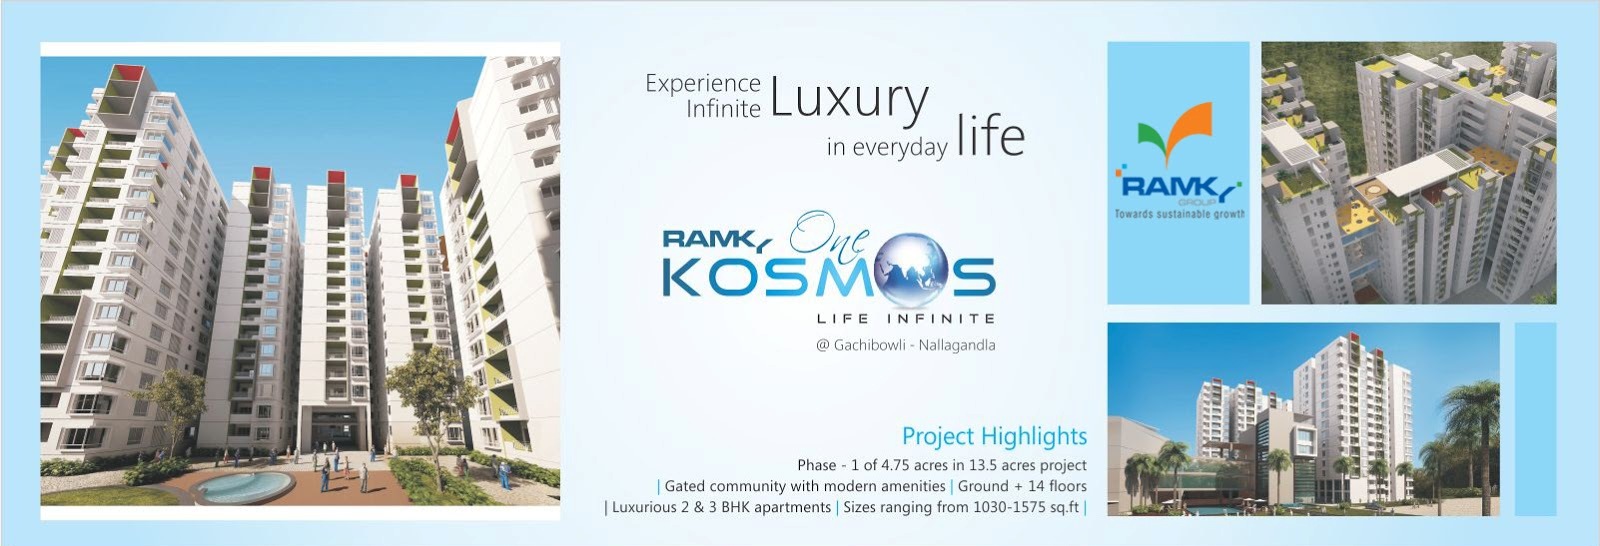 Ramky One Kosmos with a well developed social infrastructure and serene environment